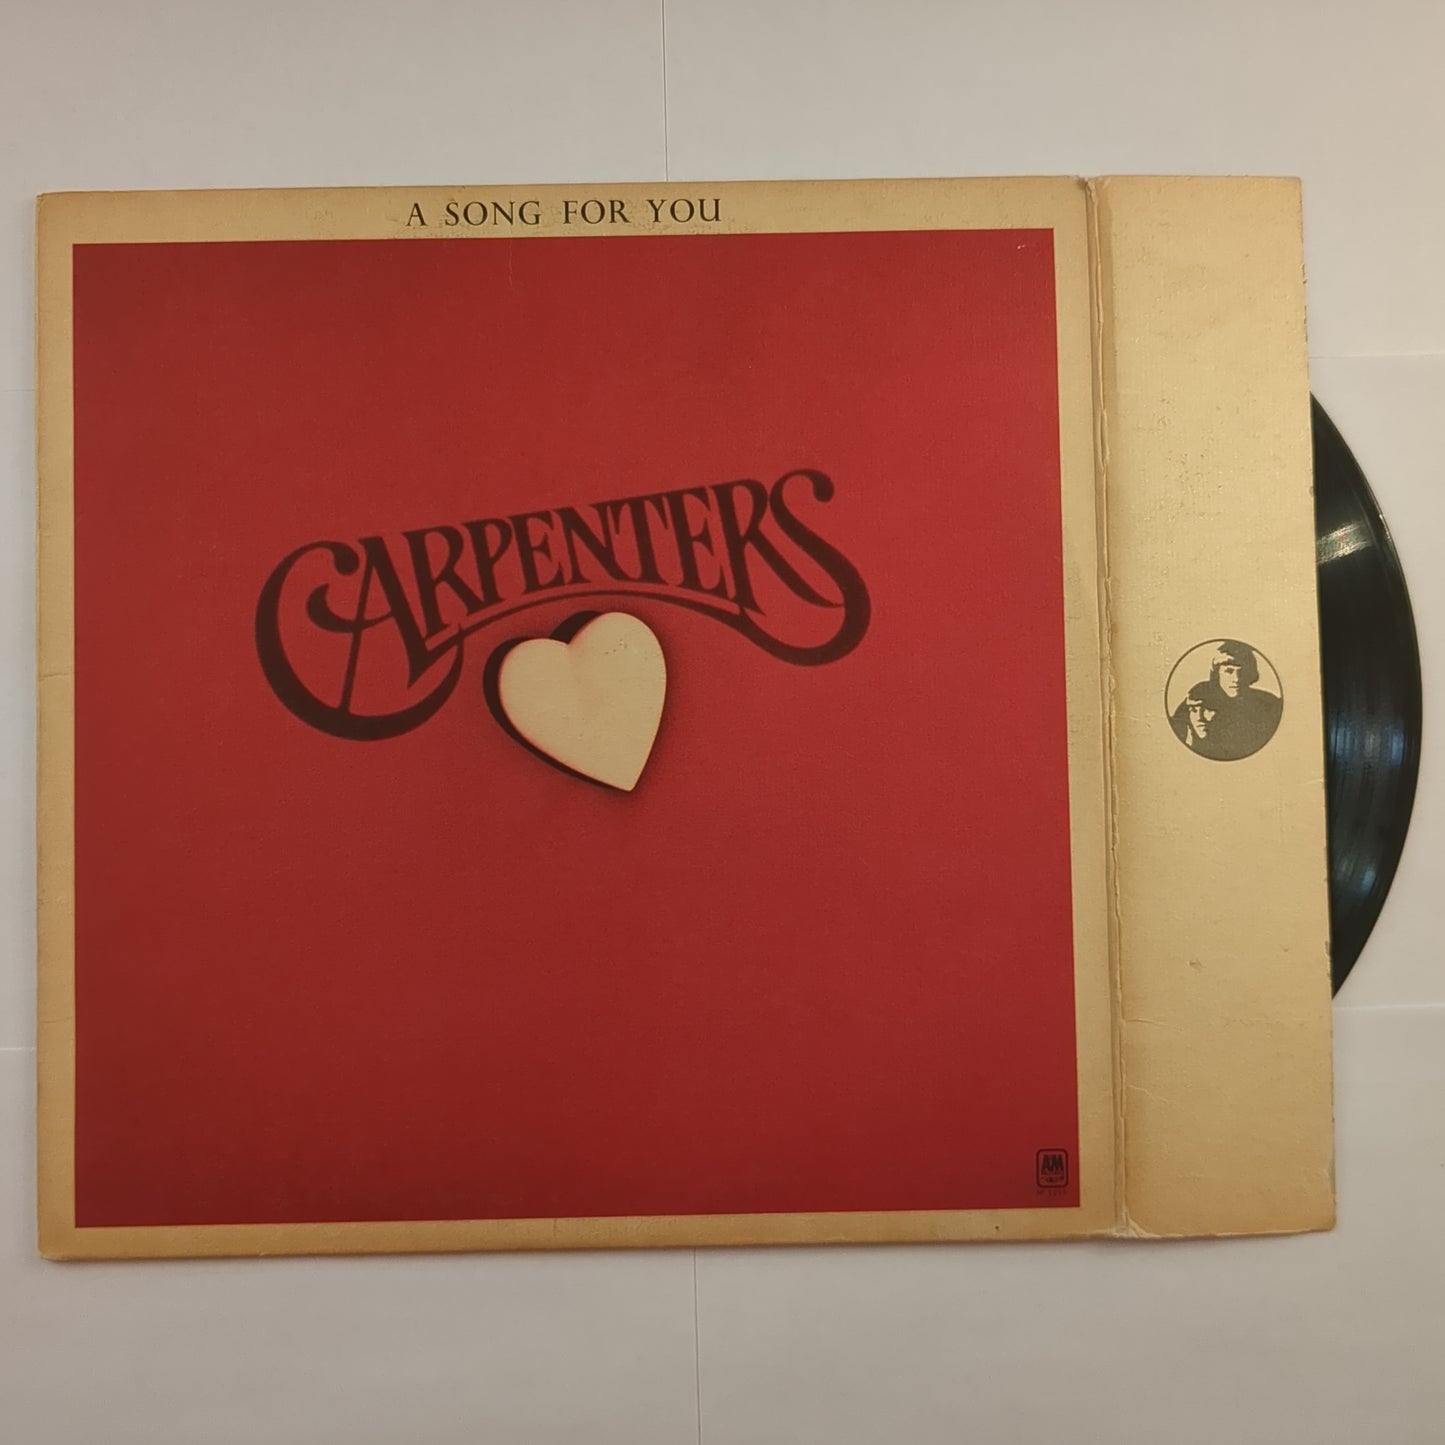 Carpenters - 'A Song For You'